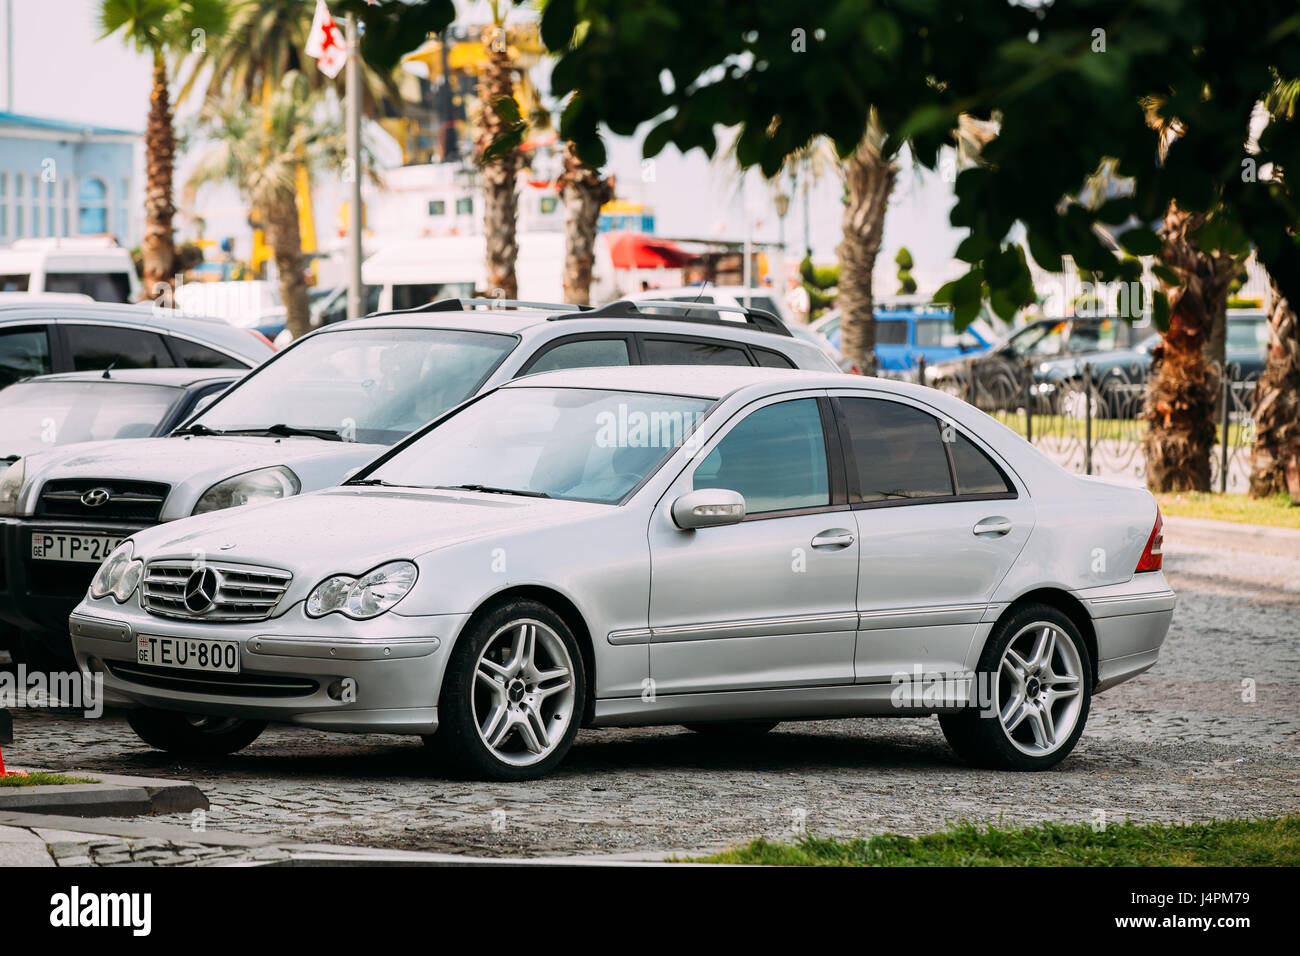 Batumi, Georgia - May 27, 2016: Mercedes-Benz C-Class (W203) Car Parked In street on Sunny Summer Day. W203 is an automobile which was produced by Ger Stock Photo